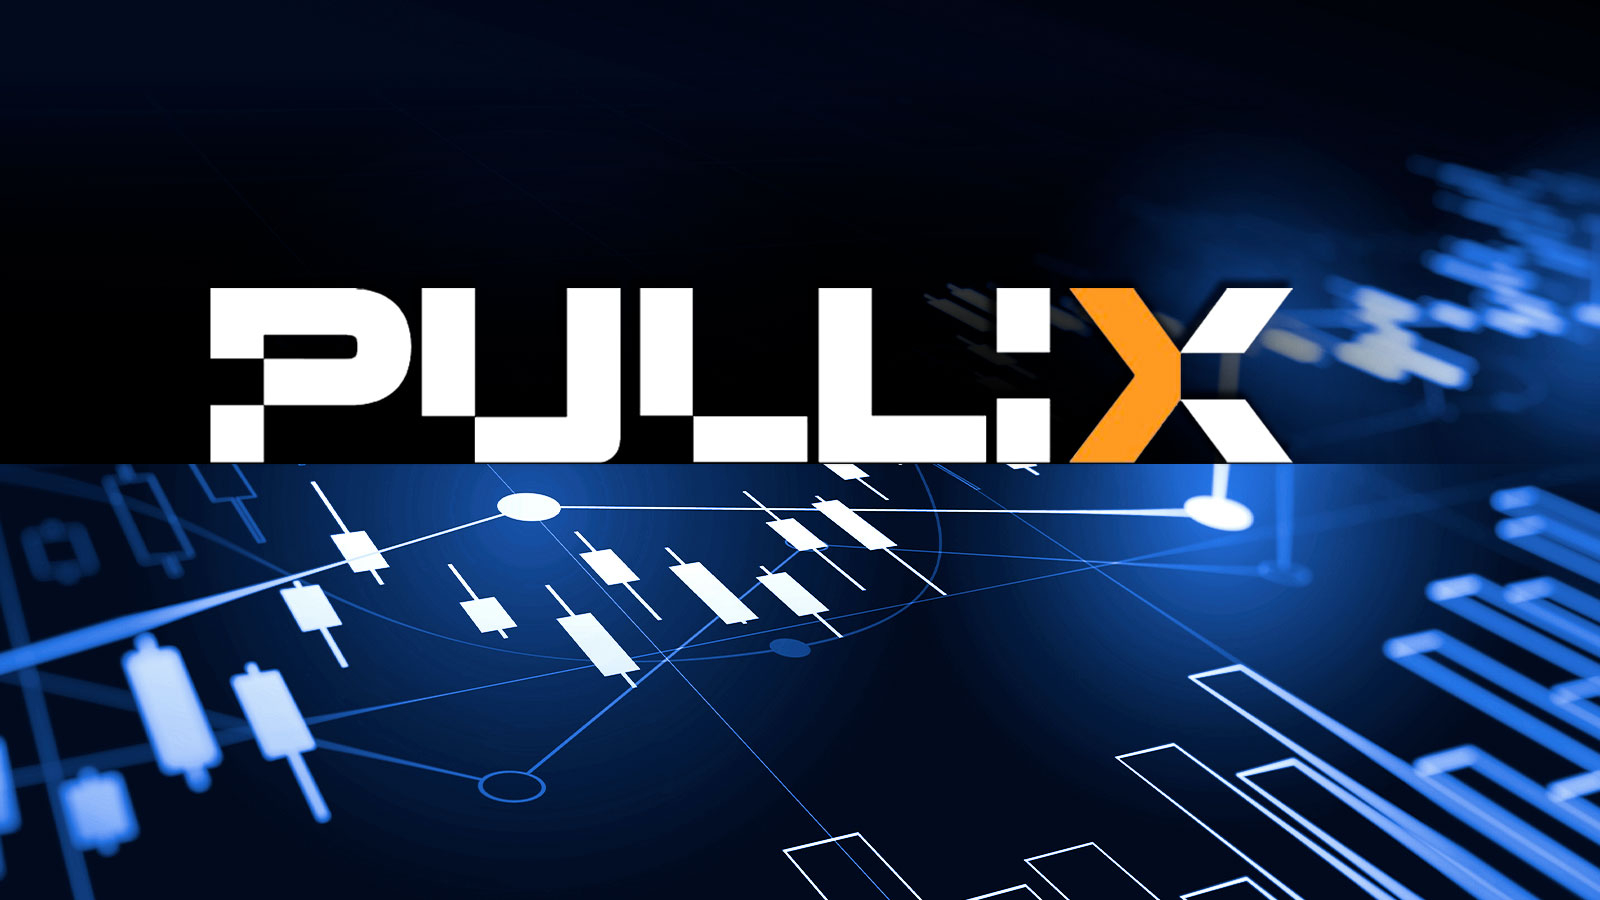 Solana (SOL) Enters Recovery Phase, Polkadot (DOT) to Rise Above $10 in 2024. Pullix (PLX) Enters Stage 7 of Presale 